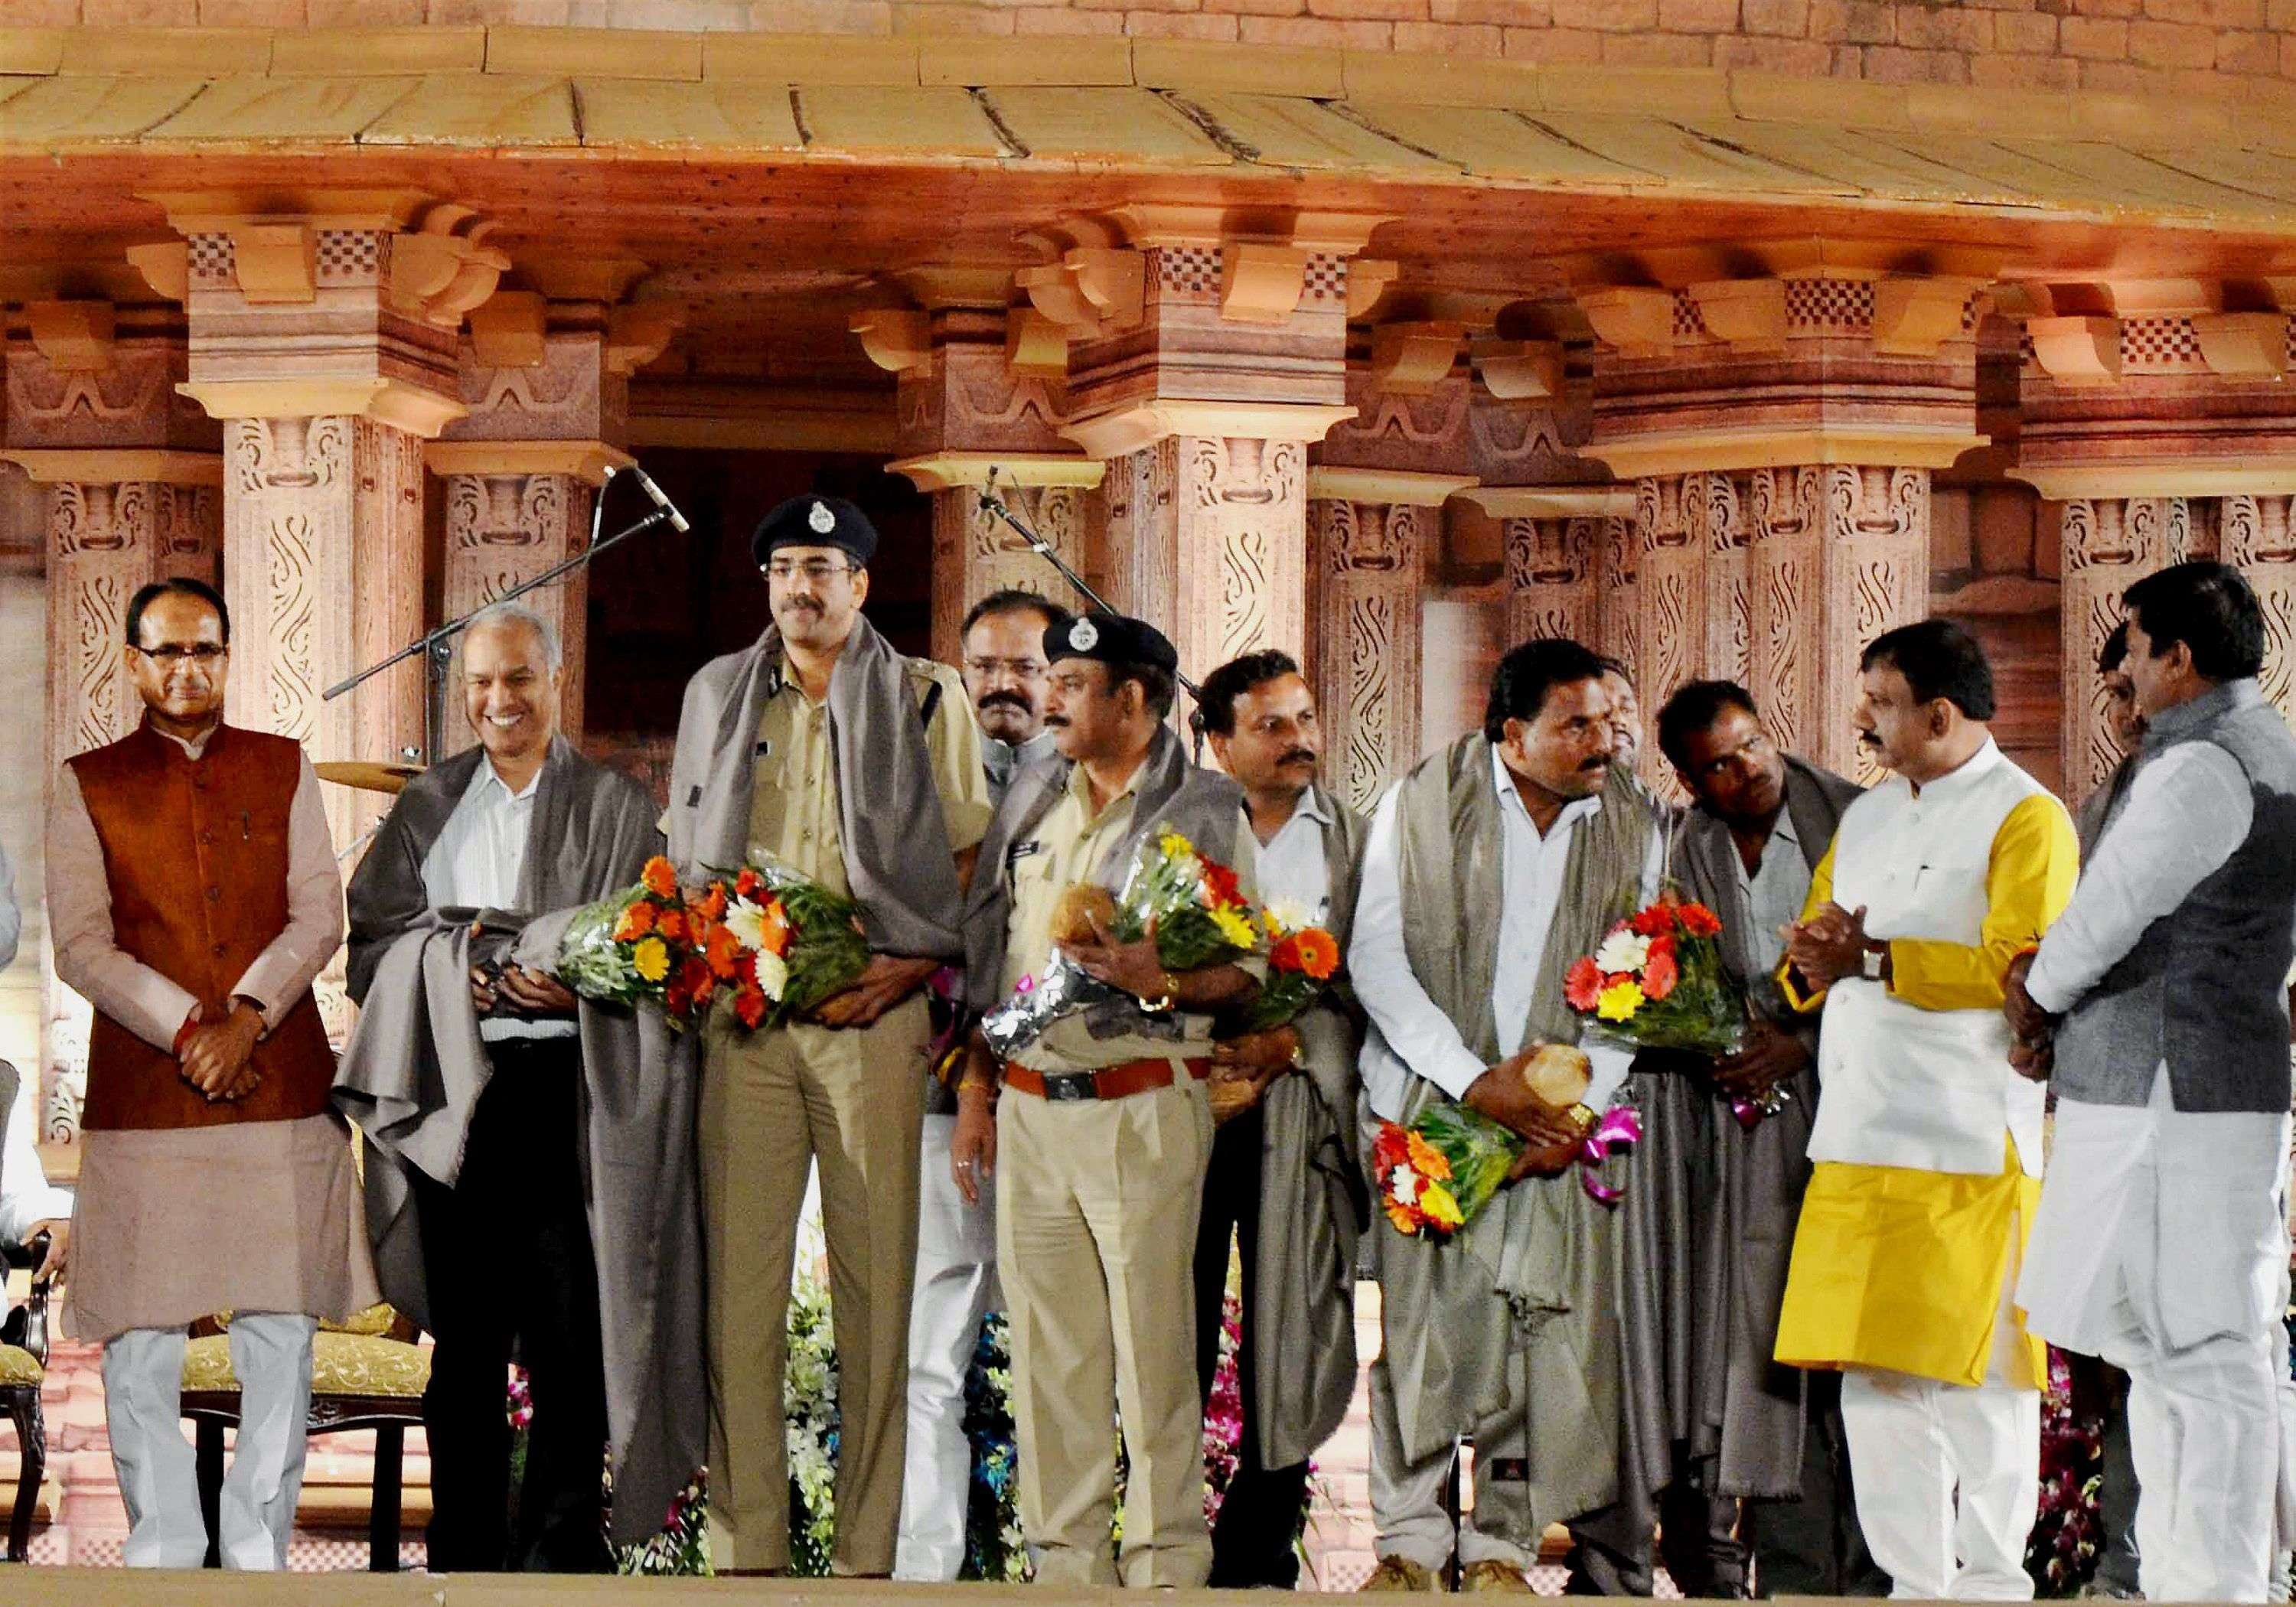 Bhopal: Madhya Pradesh Chief Minister Shivraj Singh Chouhan felicitates police officers and STF personnel who played key role in an encounter to kill SIMI terrorists who escaped from jail, during 61st Madhya Pradesh foundation day programme in Bhopal on Tuesday. PTI Photo(PTI11_2_2016_000032B)